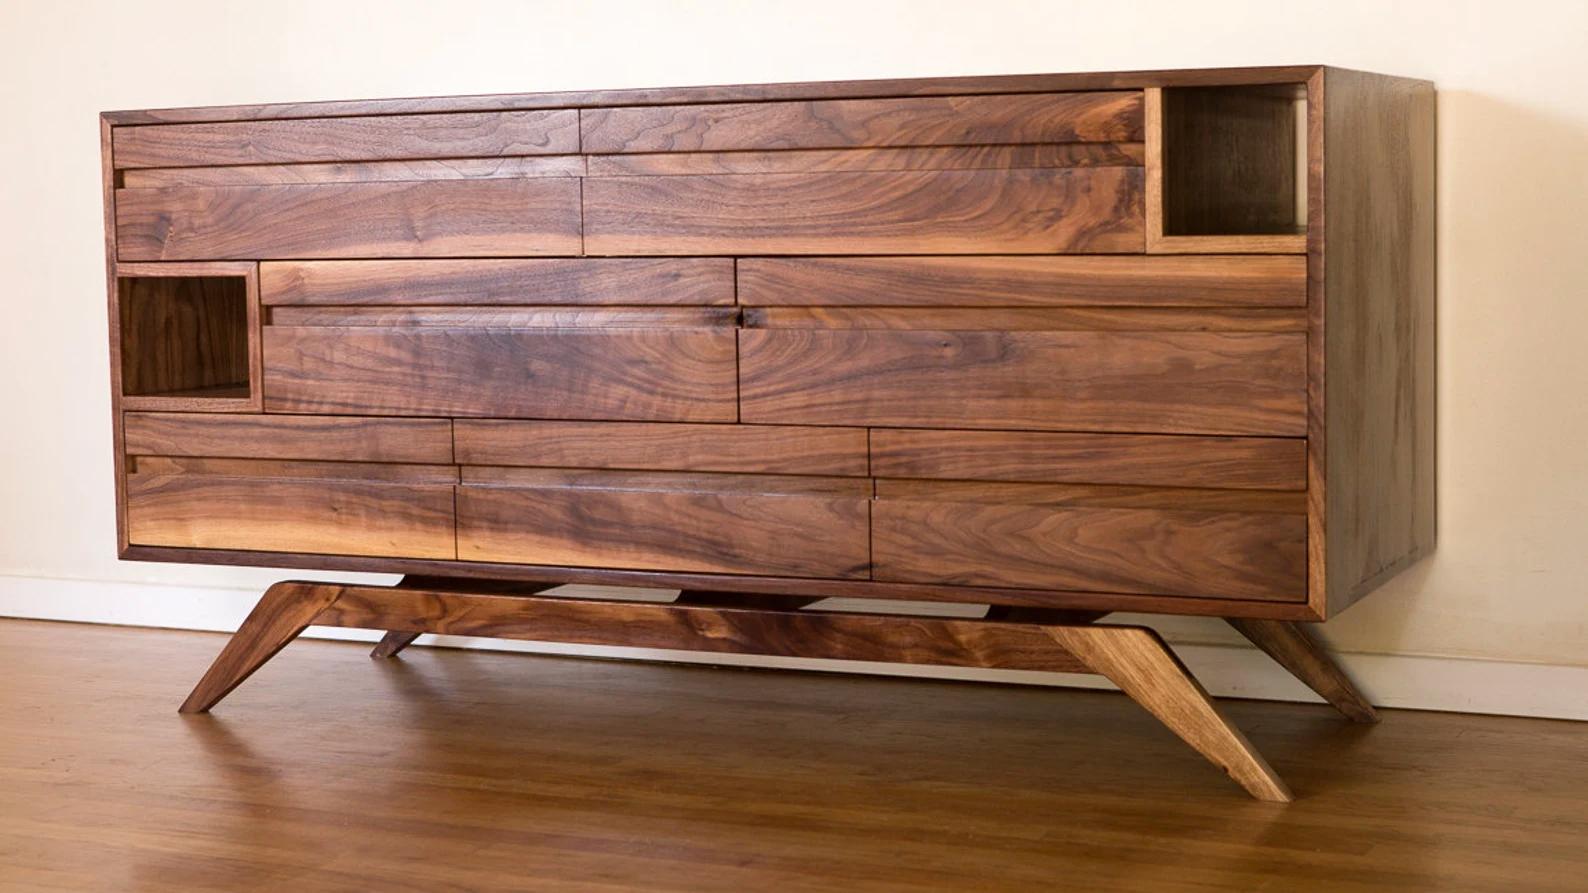 This dresser is an original design, inspired by the modern, minimal, clean aesthetic of midcentury/ Danish modern. It has seven drawers that glide on soft-close hardware for the utmost in smooth operation, and the two cubbie openings are there to be